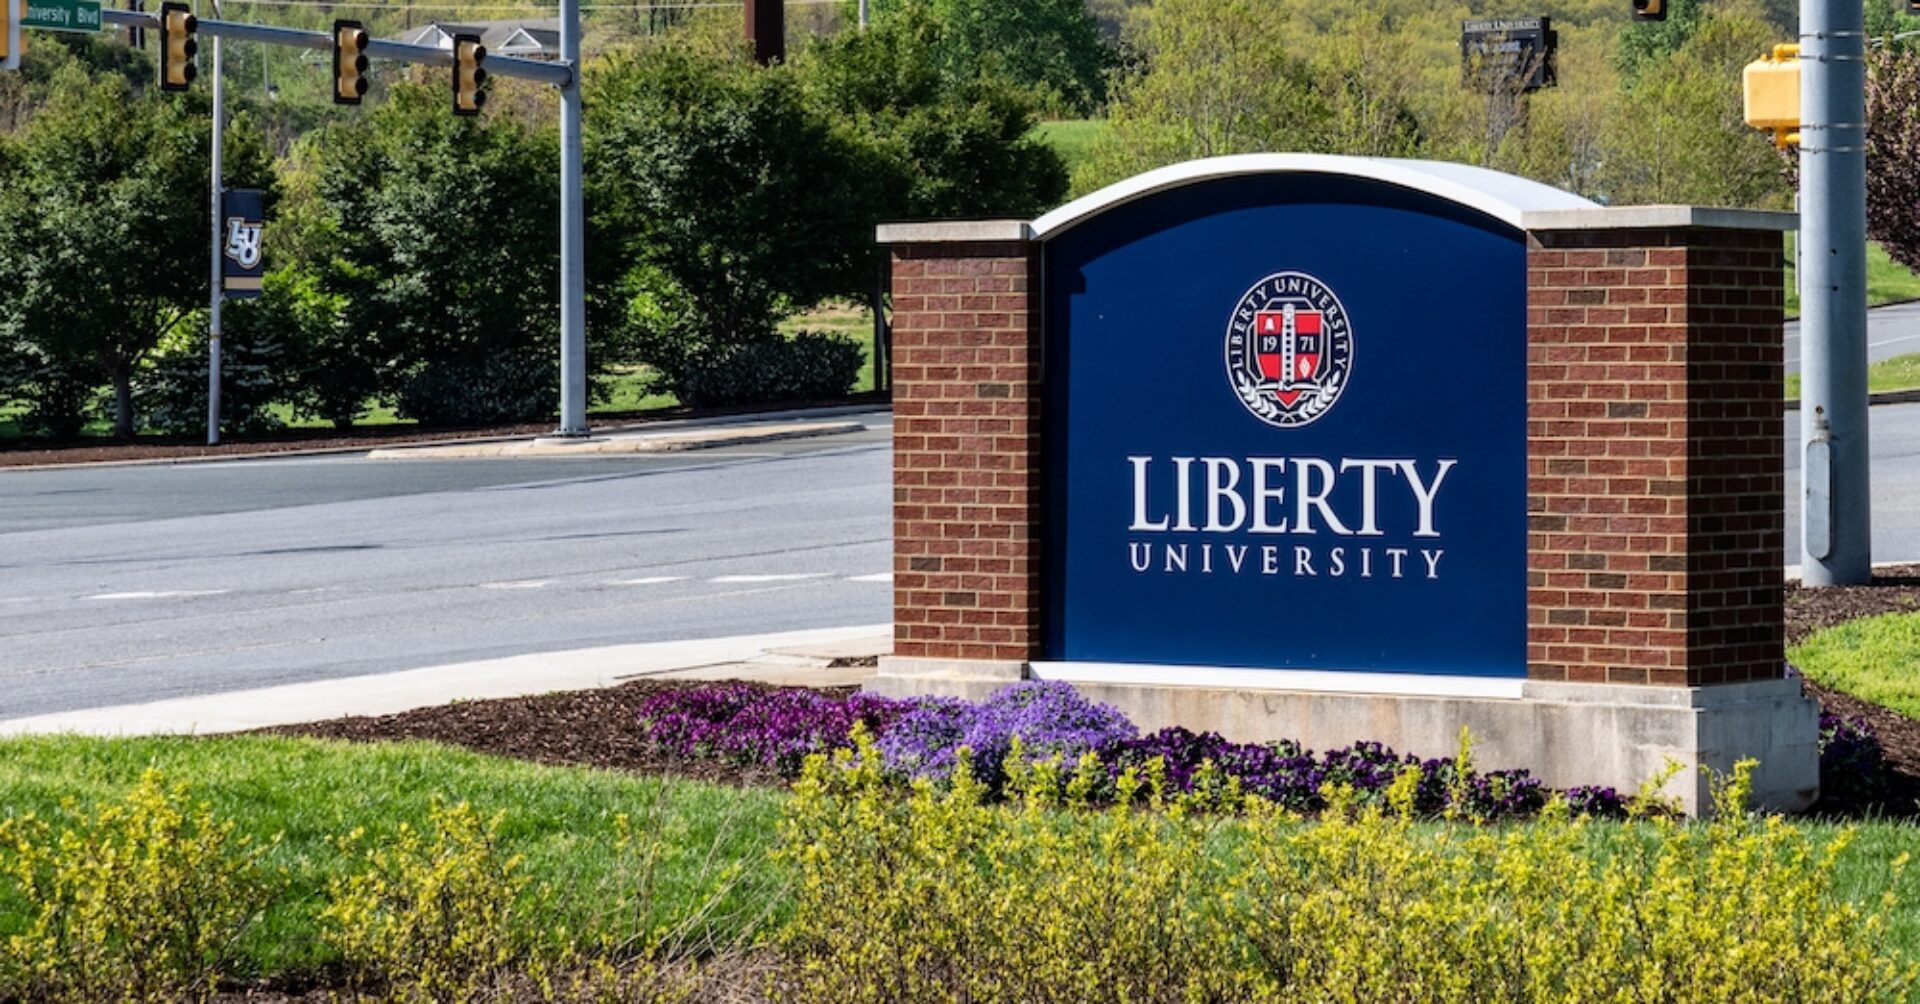 The Department of Education fined Liberty University, a Christian college in Lynchburg, Virginia, a record-breaking $14 million for violating federal campus safety laws.